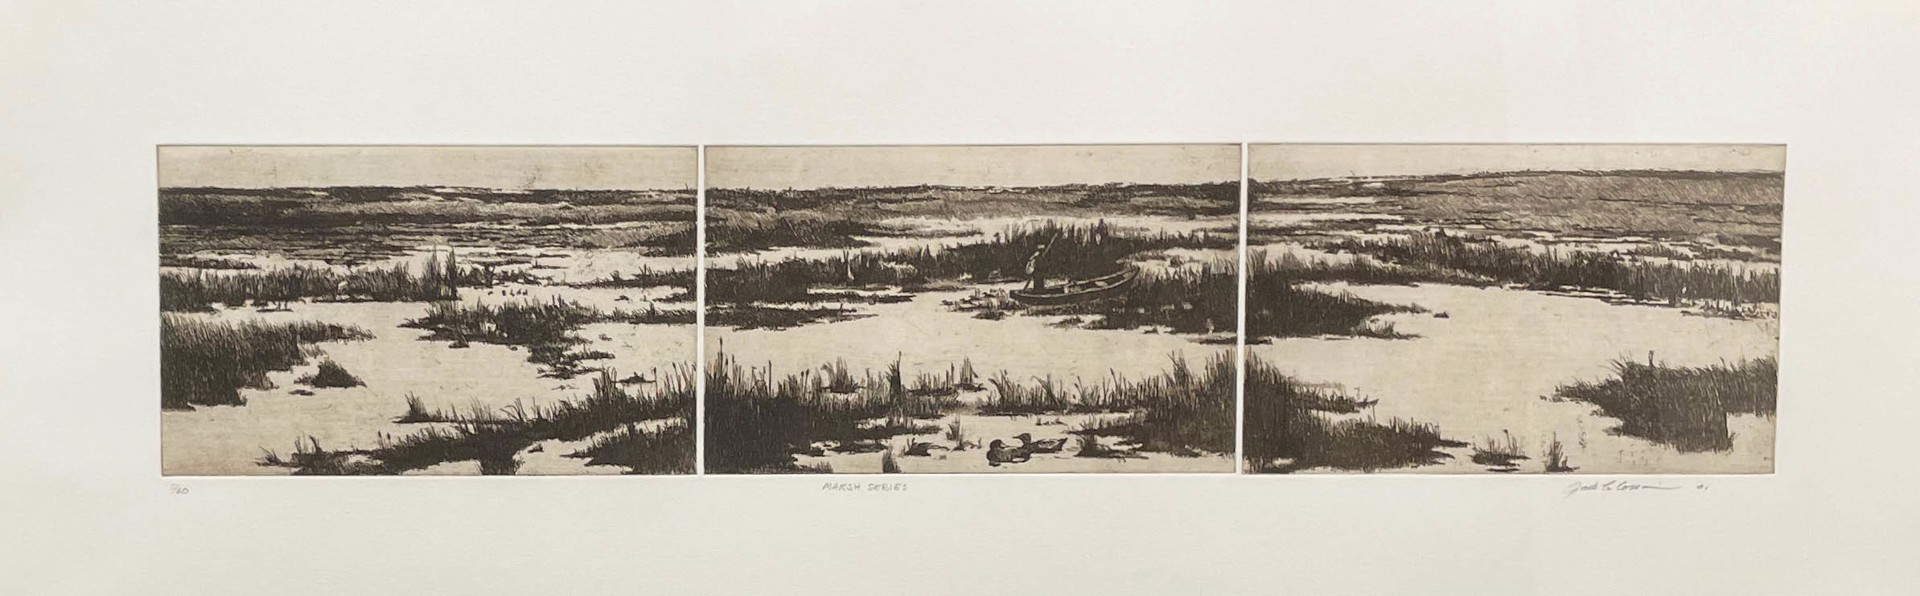 Marsh Series triptych, 2/20, 2001 by Jack Cowin (1947-2014)